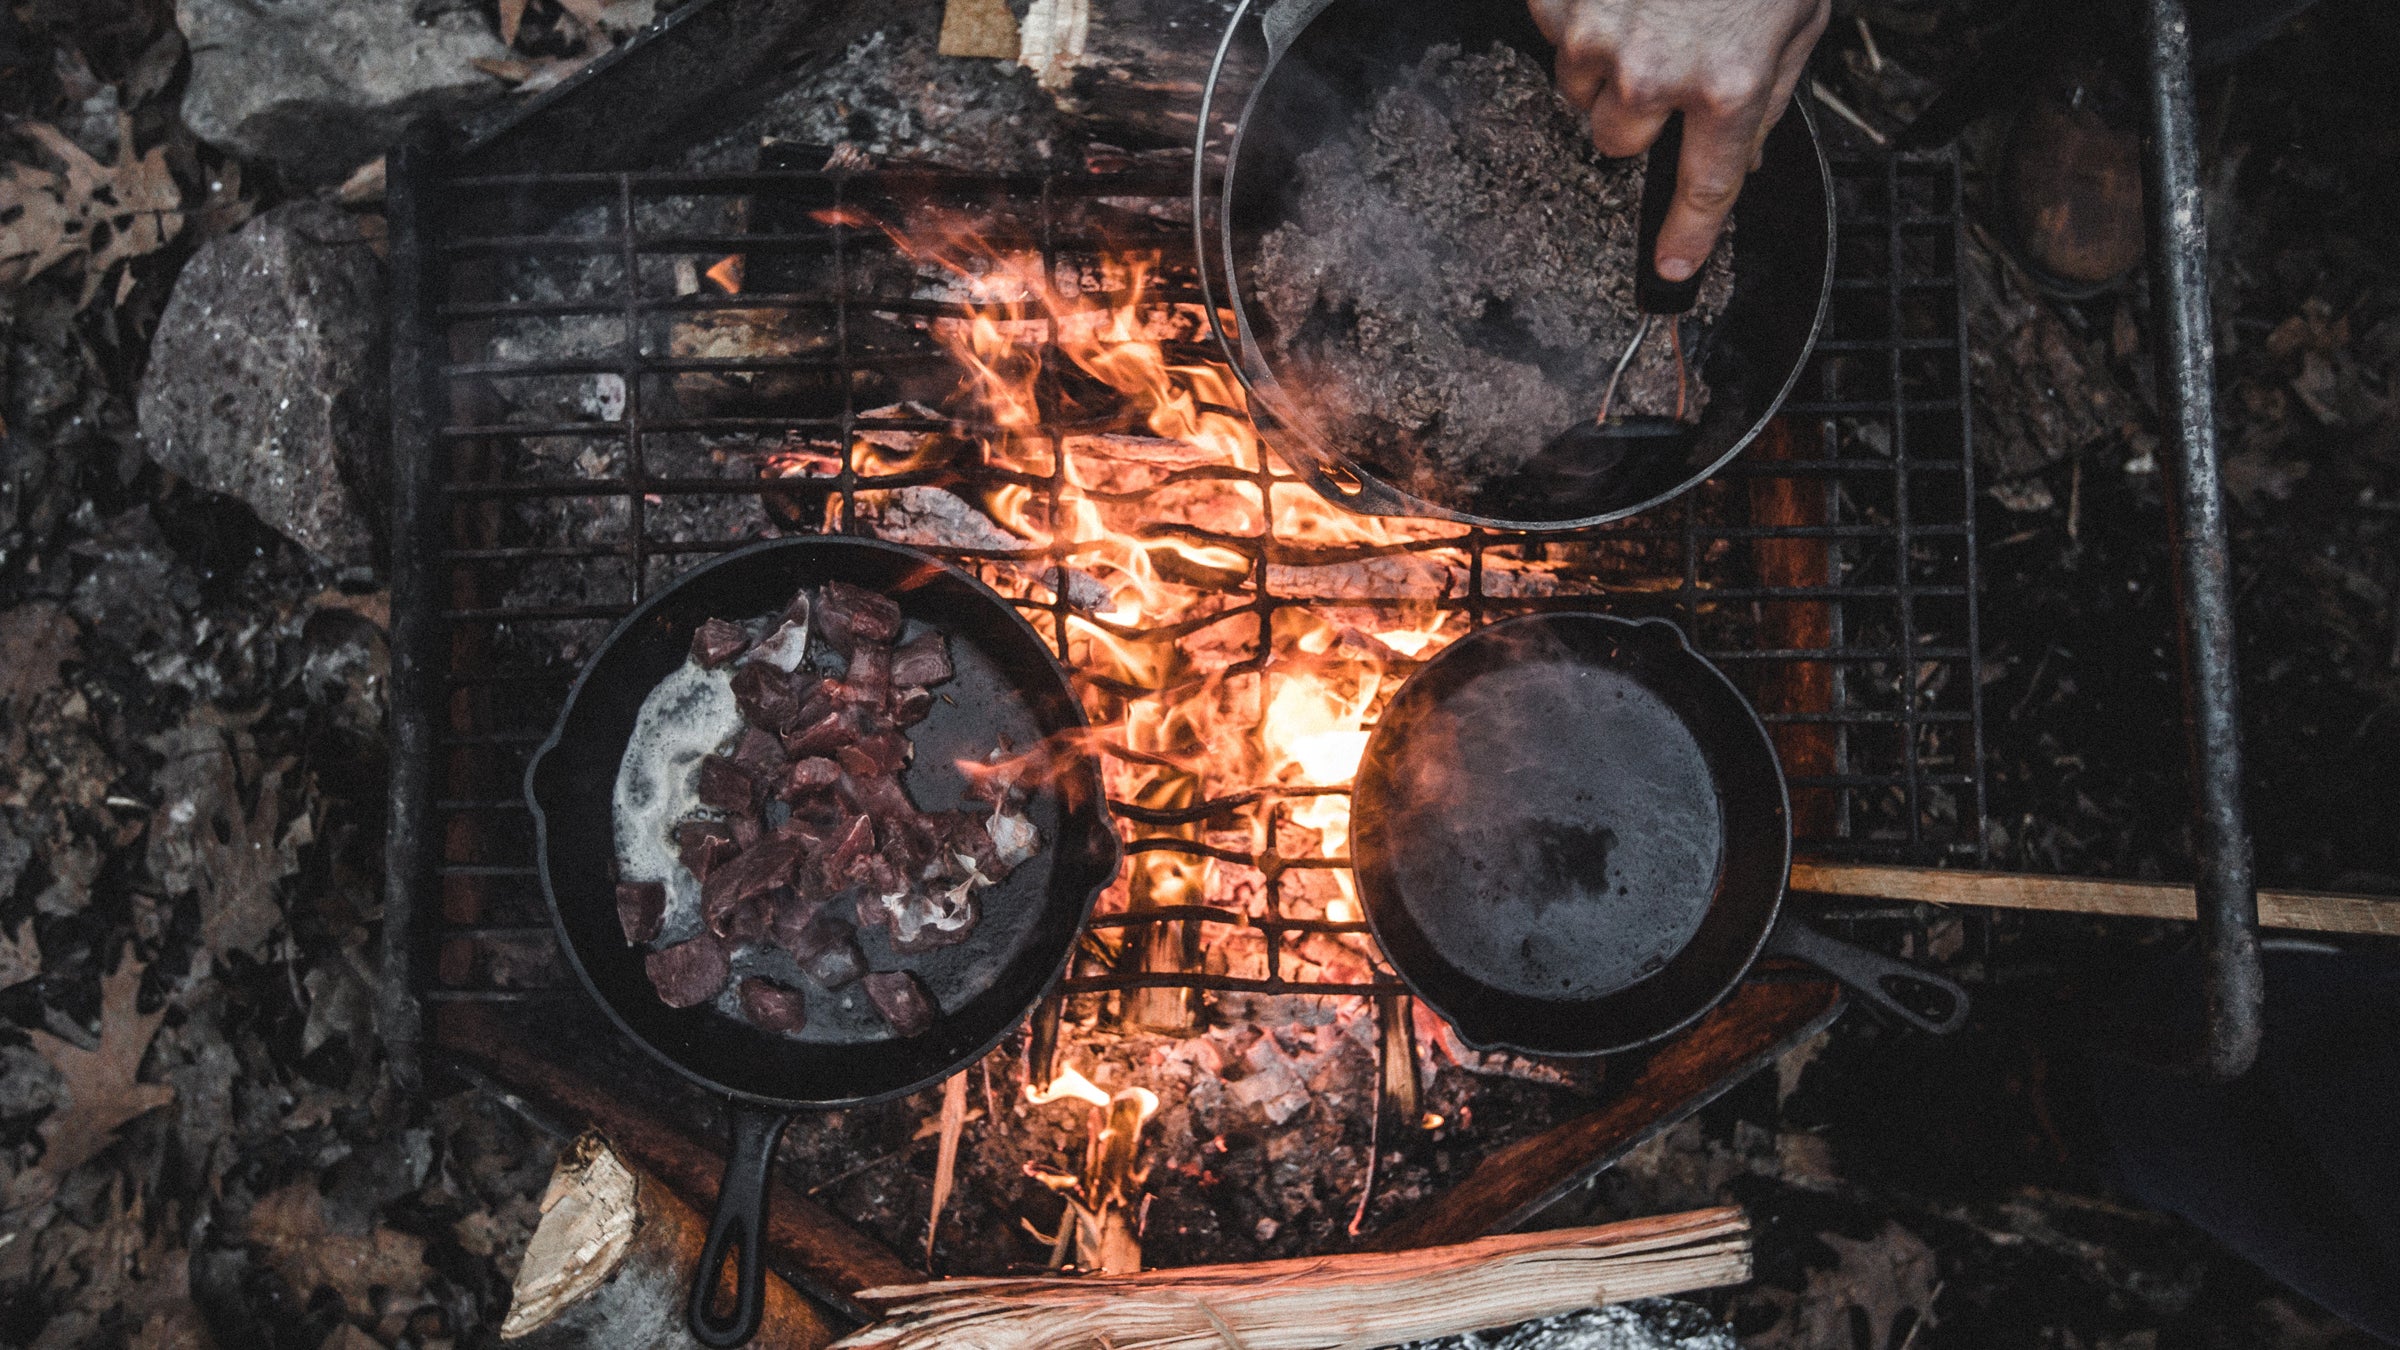 Campfire Stew Recipes  A Beginner's Guide to Cooking Outdoors